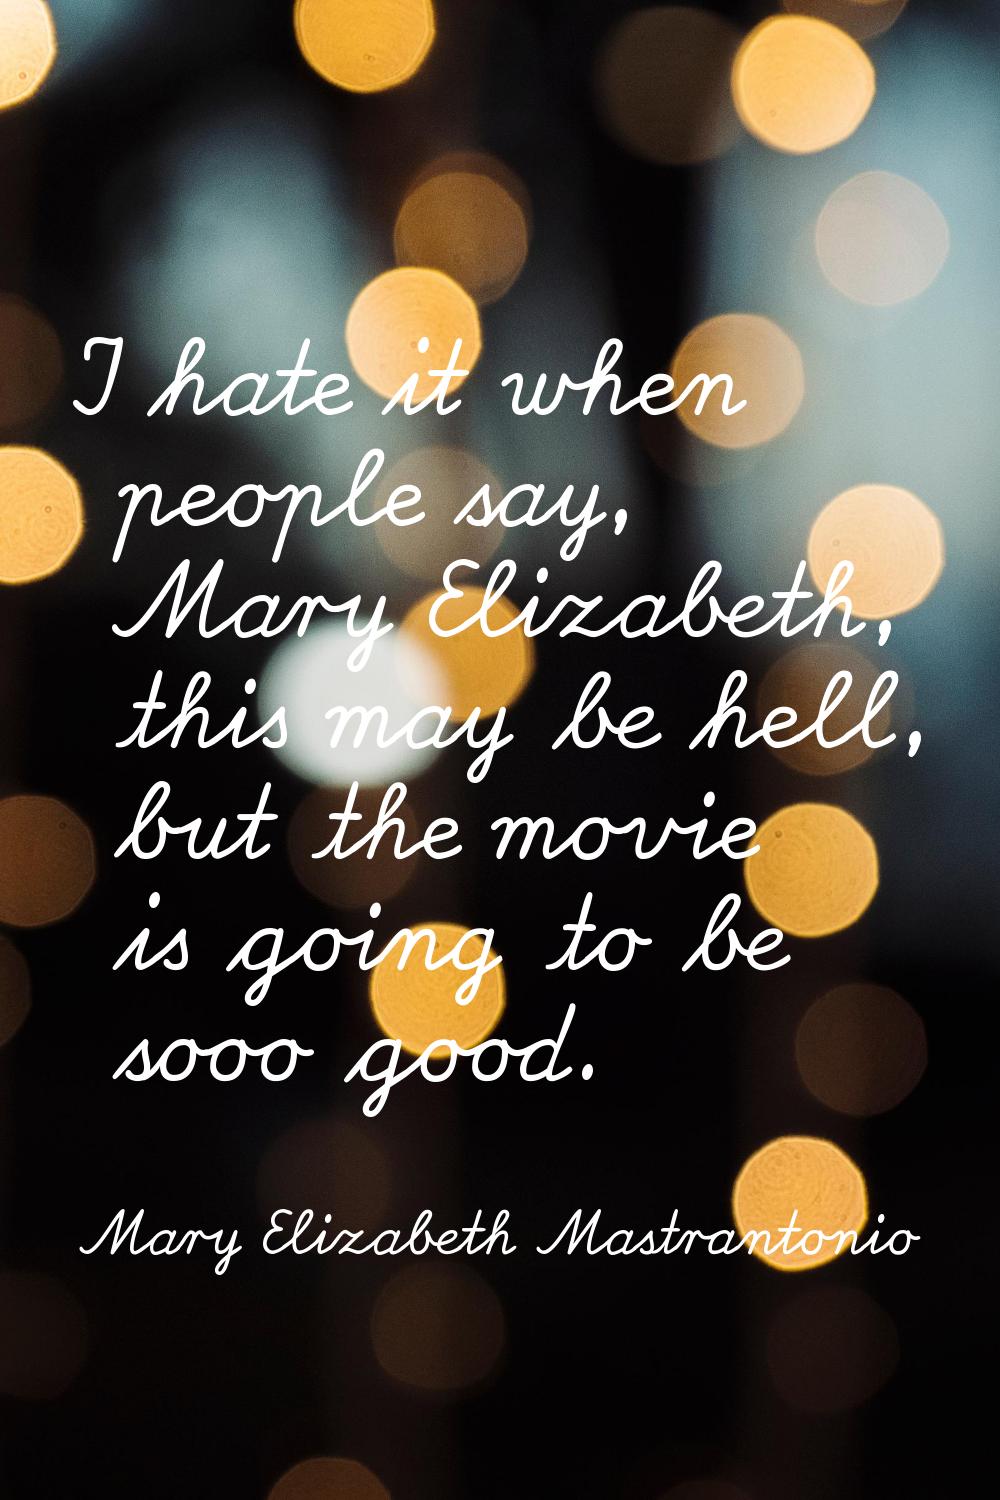 I hate it when people say, Mary Elizabeth, this may be hell, but the movie is going to be sooo good